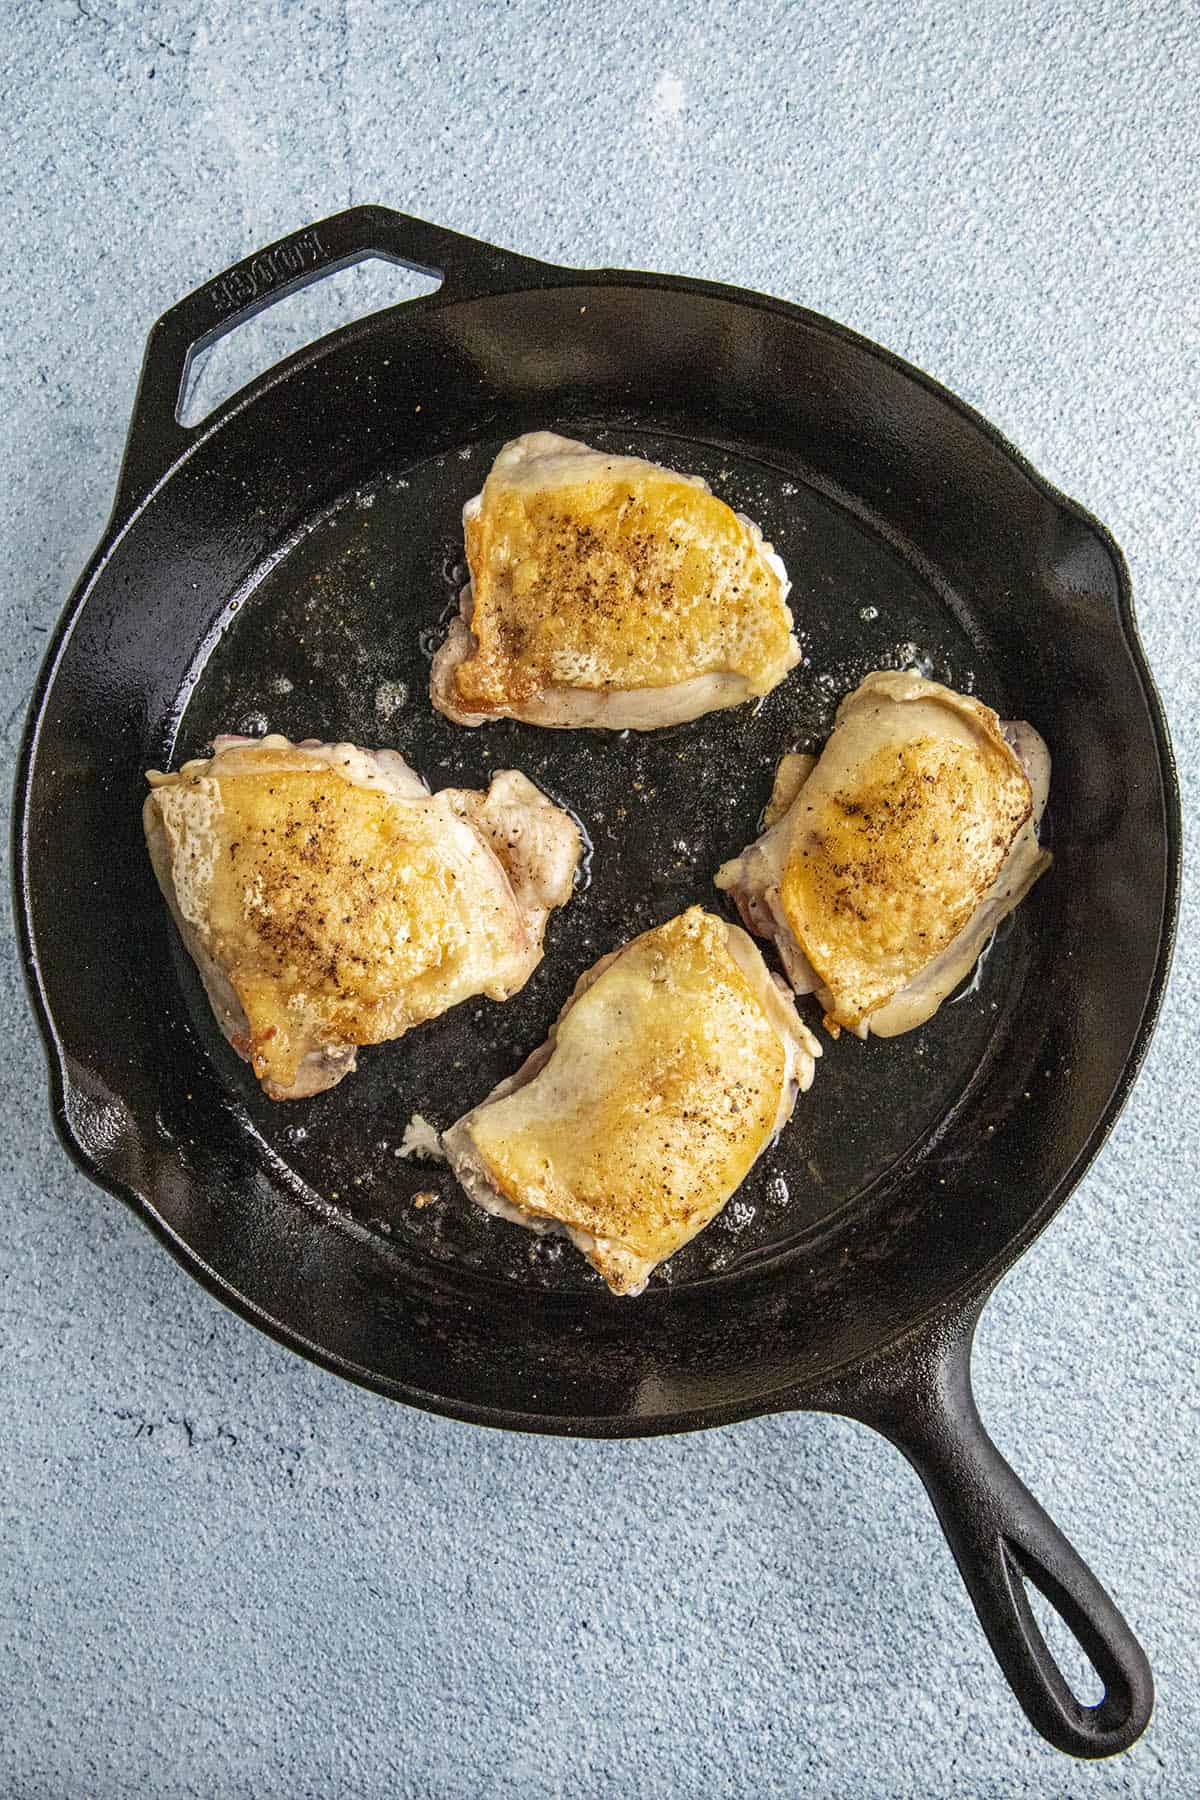 Browning the chicken in a hot pan to make Chicken Scarpariello